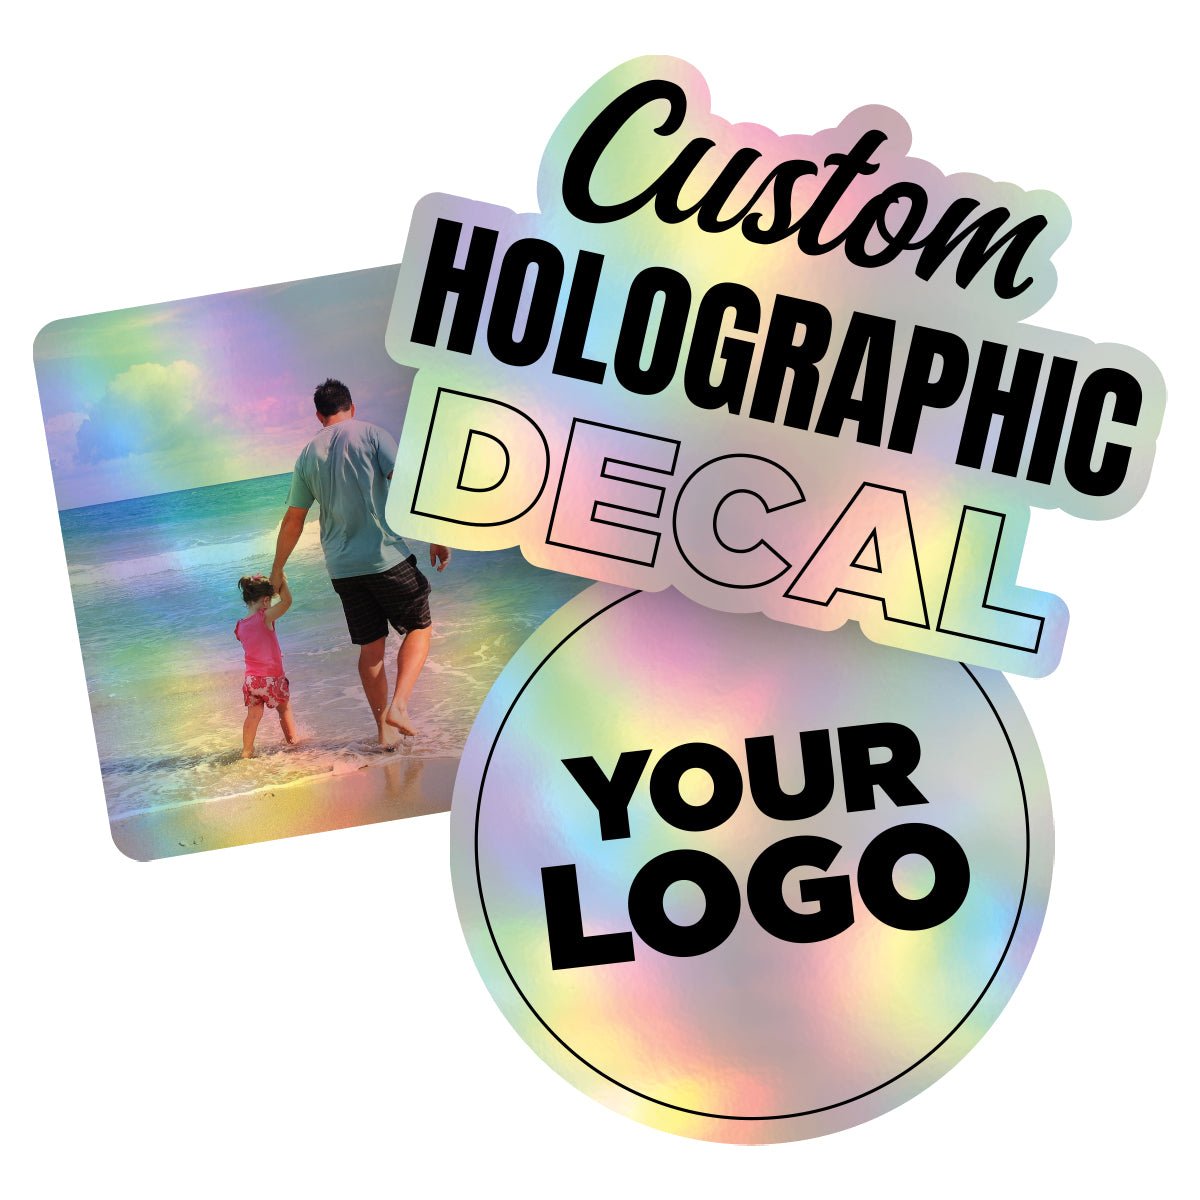 Personalized Holographic Vinyl Sticker Decal Custom Made Any Logo, Image, Text, Or Name Die Cut To Shape - 50 Pack, 8 Inch, Die Cut